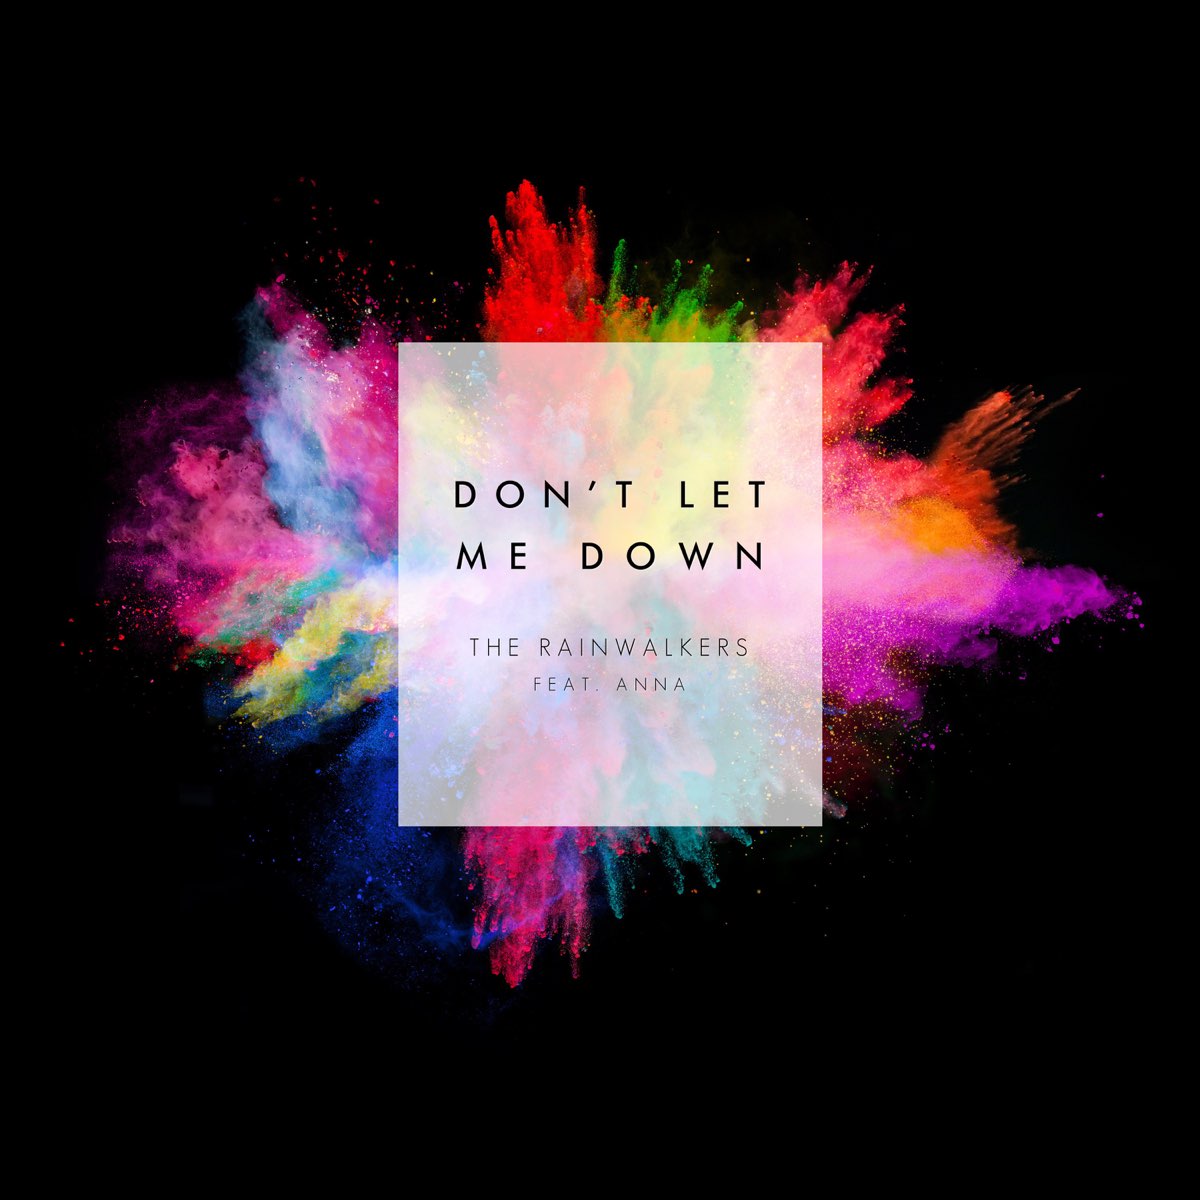 Don`t Let me down. The Chainsmokers don't Let me down. The Chainsmokers don't Let me down обложка. Don't Let me down Daya обложка. The chainsmokers feat daya don t